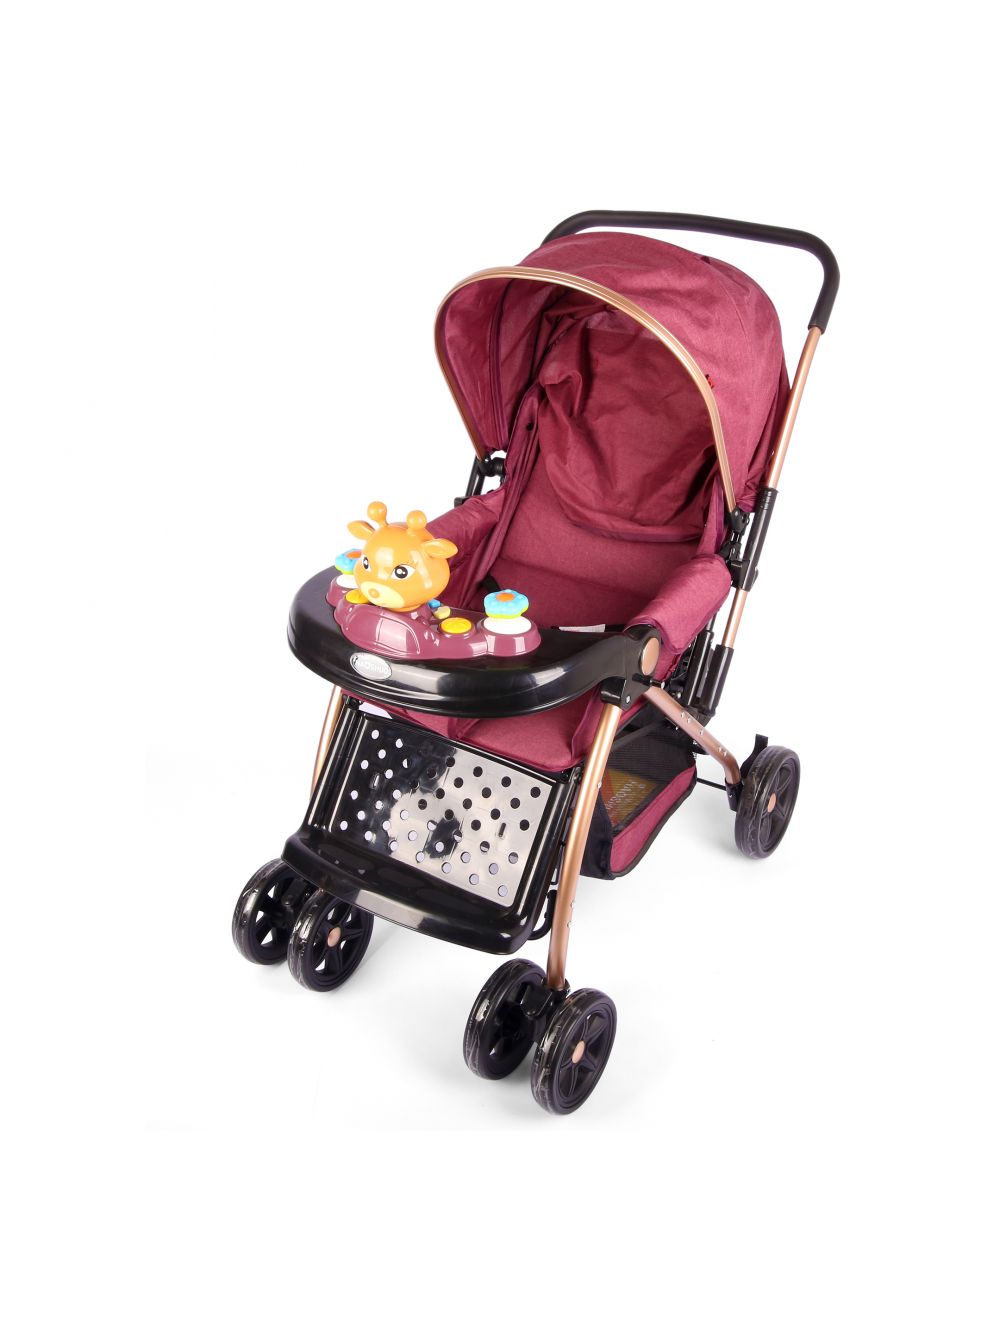 Junior Baby Stroller Golden Frame Maroon With Music Tray